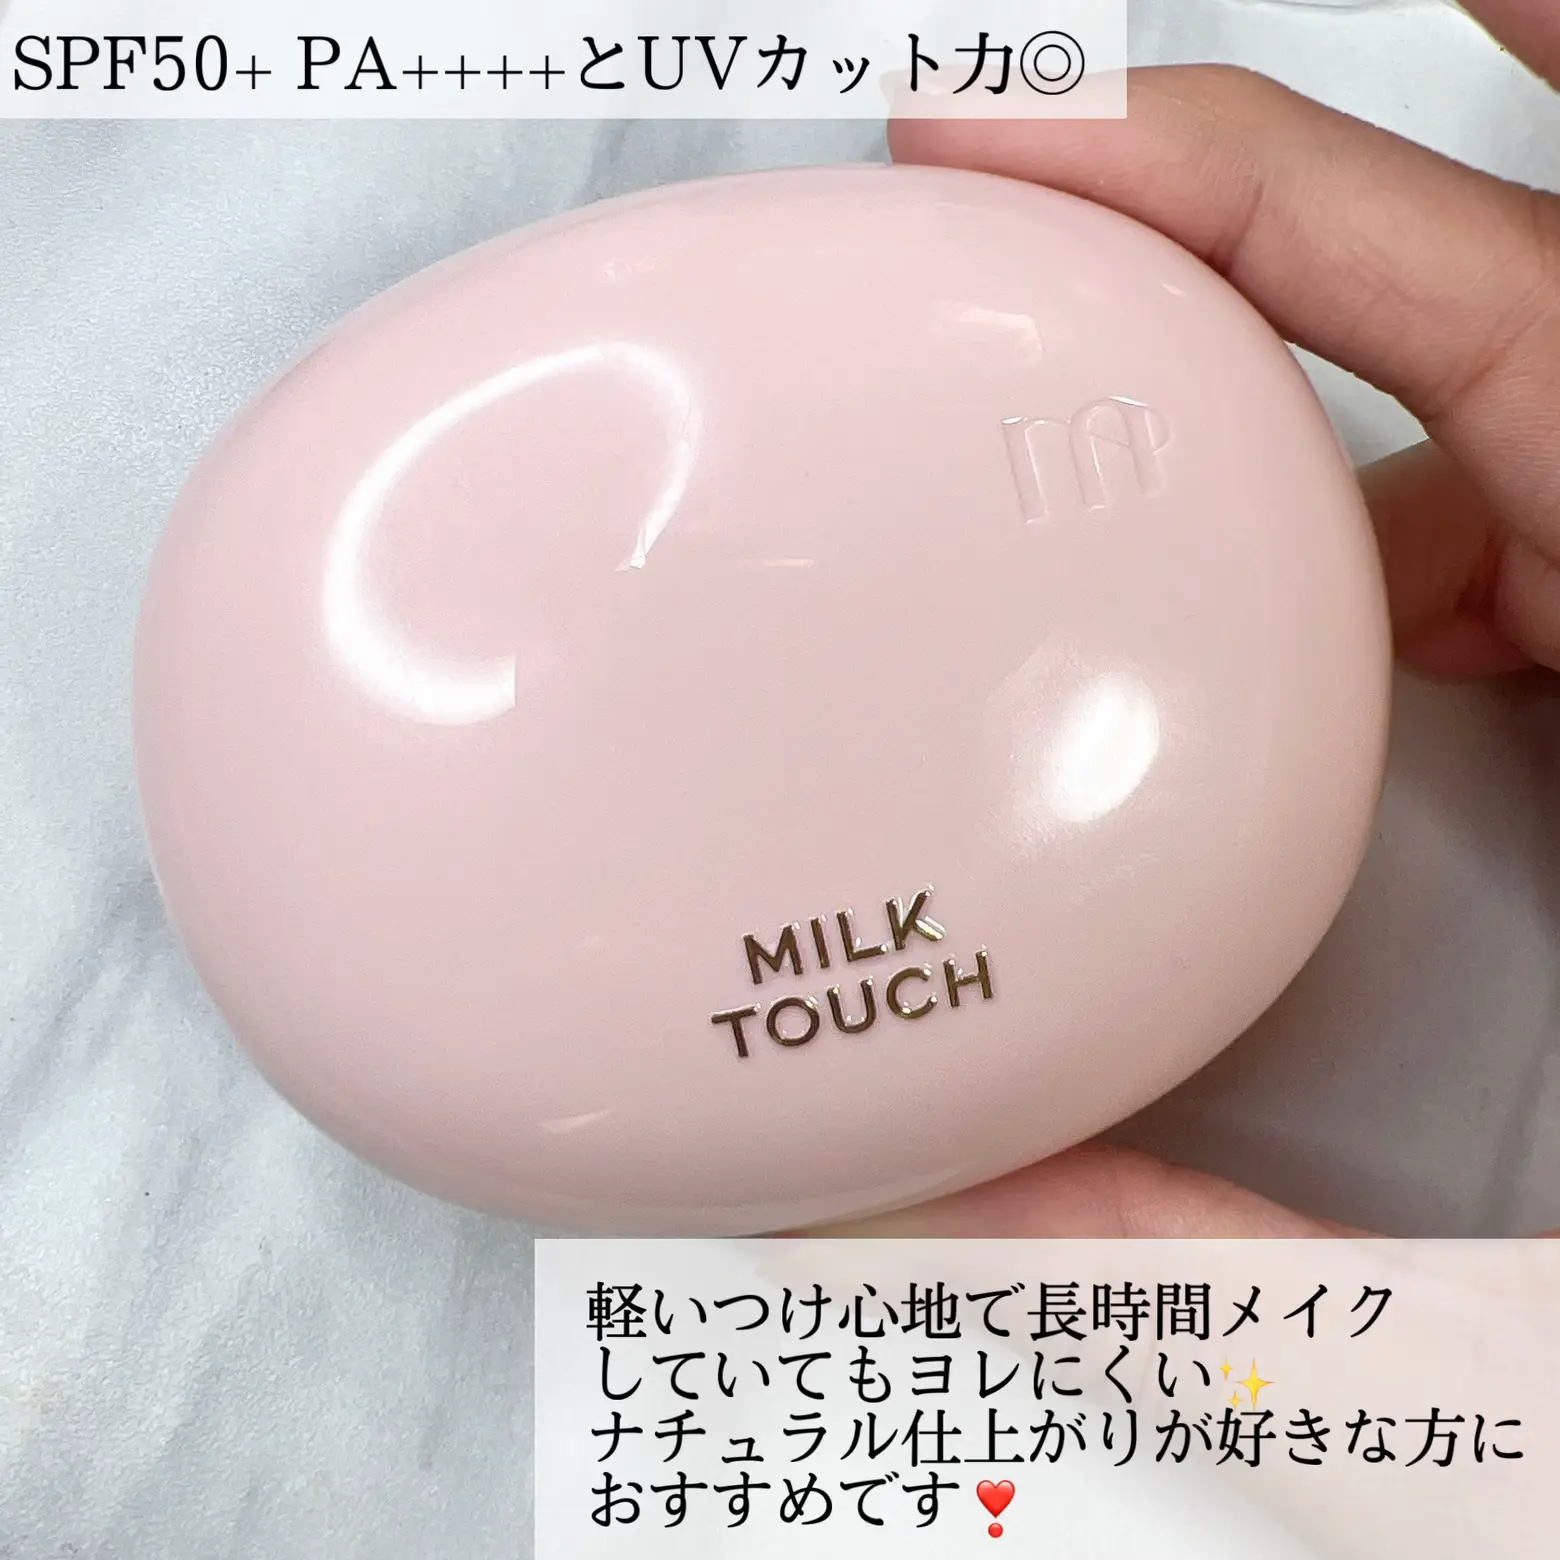 MILK TOUCH New Foundation! All Day Skin Fit Milky Glow Cushion